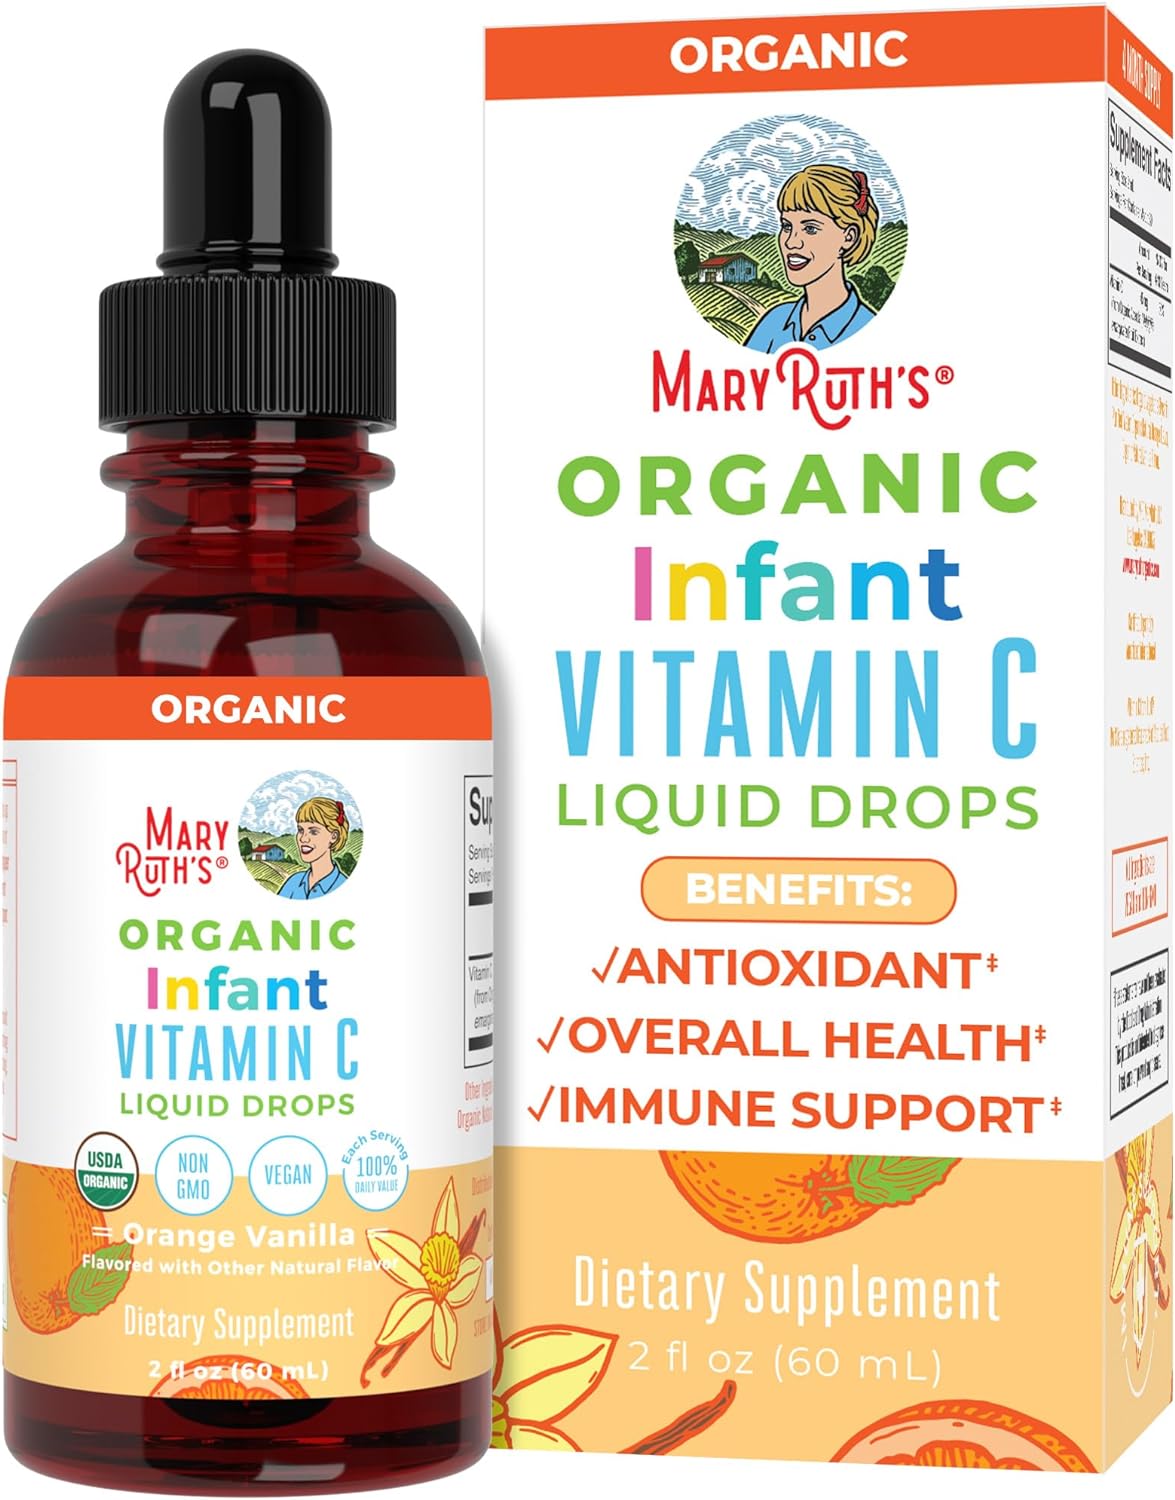 MaryRuth Organics Infant Vitamin C Drops, USDA Organic, Vitamin C Supplement for Infants, Ages 0-12 Months, Vitamin for Immune Support & Overall Health, Vegan, Non-GMO, Gluten Free, 30 Servings